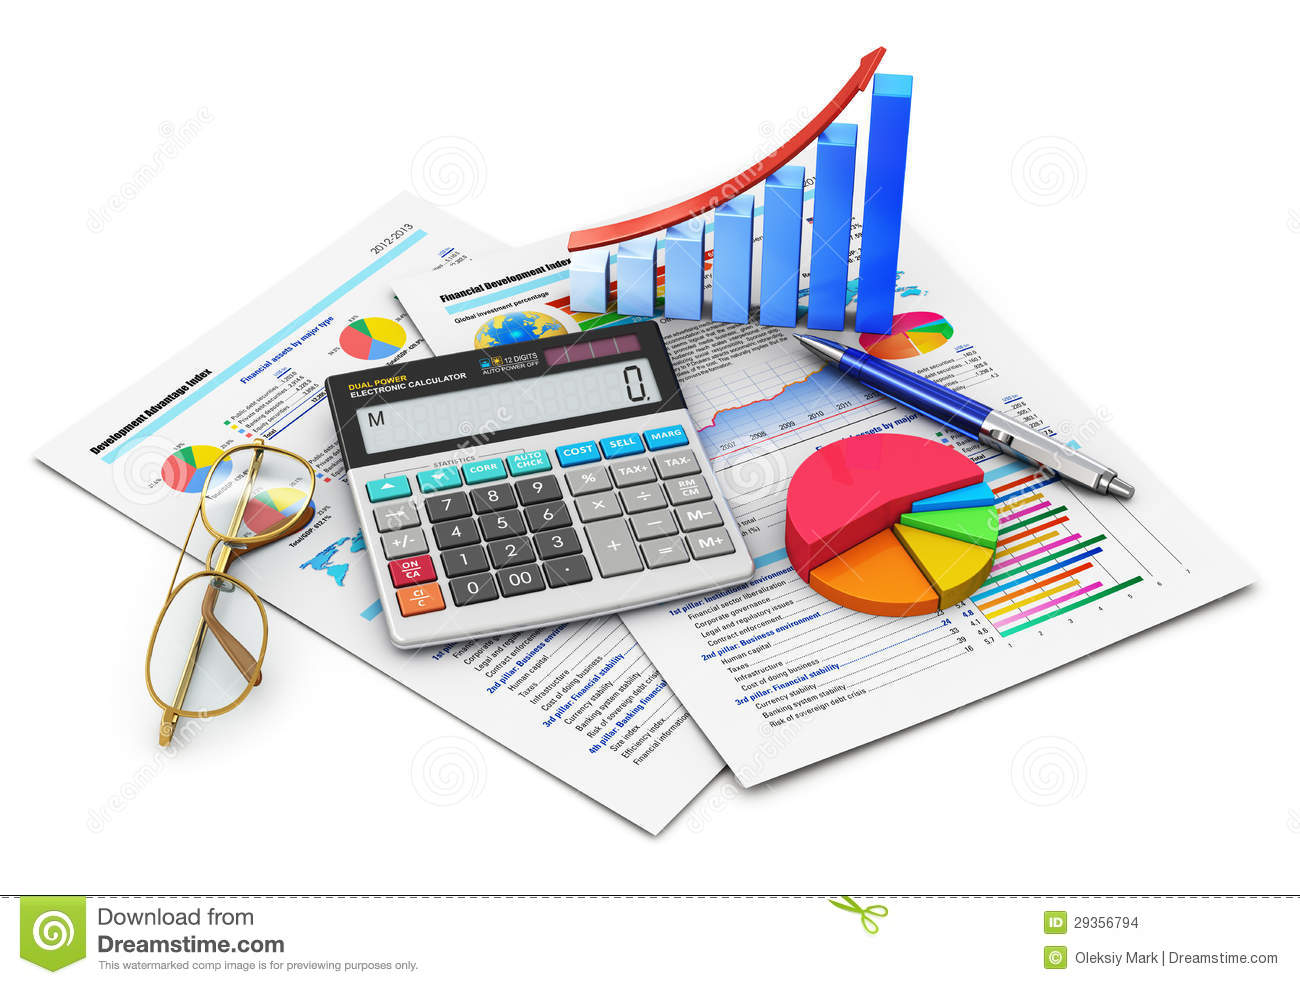 accounting clipart - photo #17